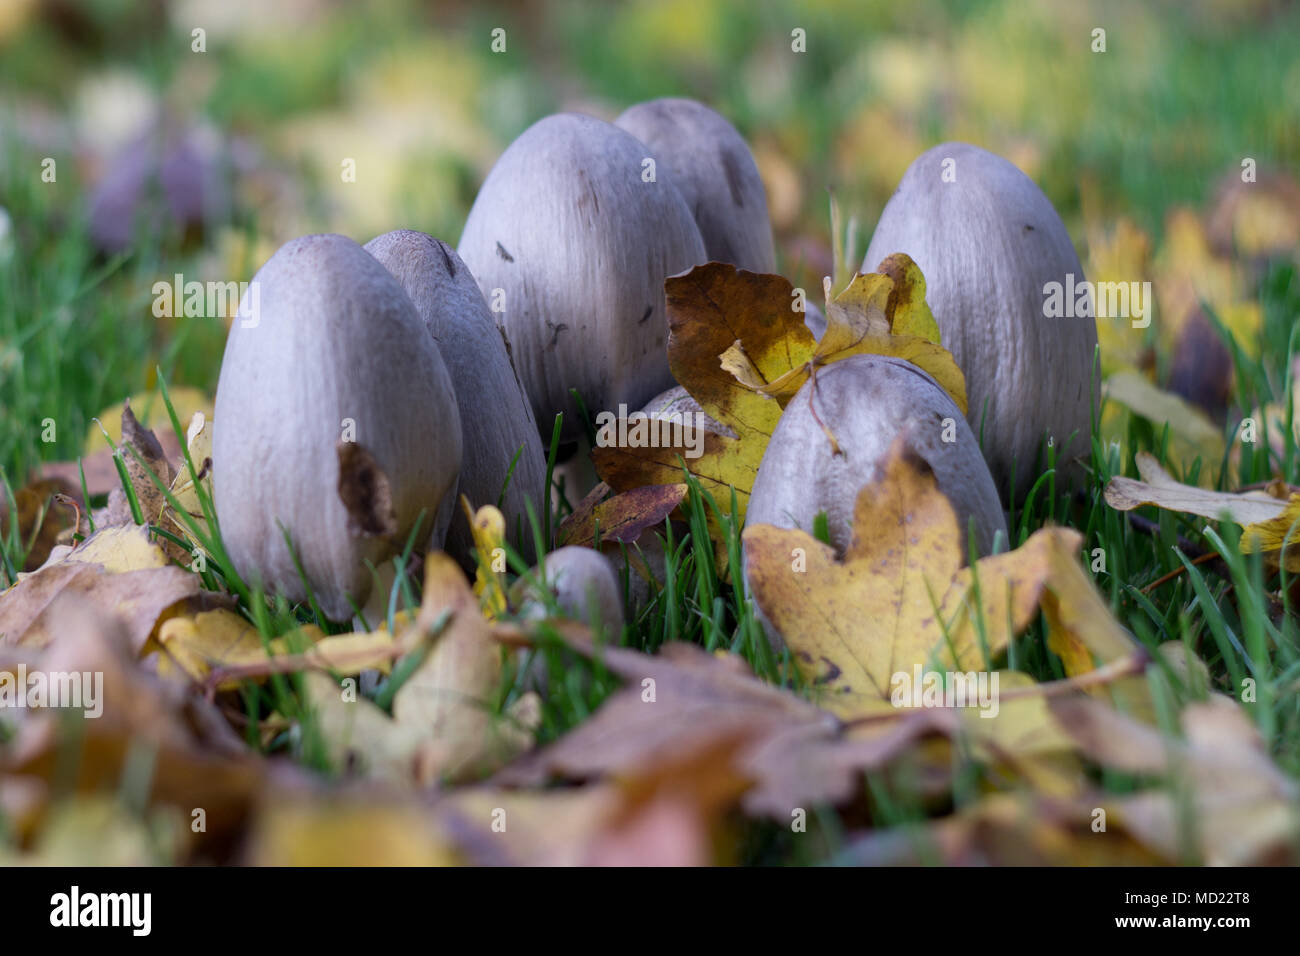 Mush rooms / toadstools in the autumn surrounded by brown leaves which have fallen from the trees. Stock Photo